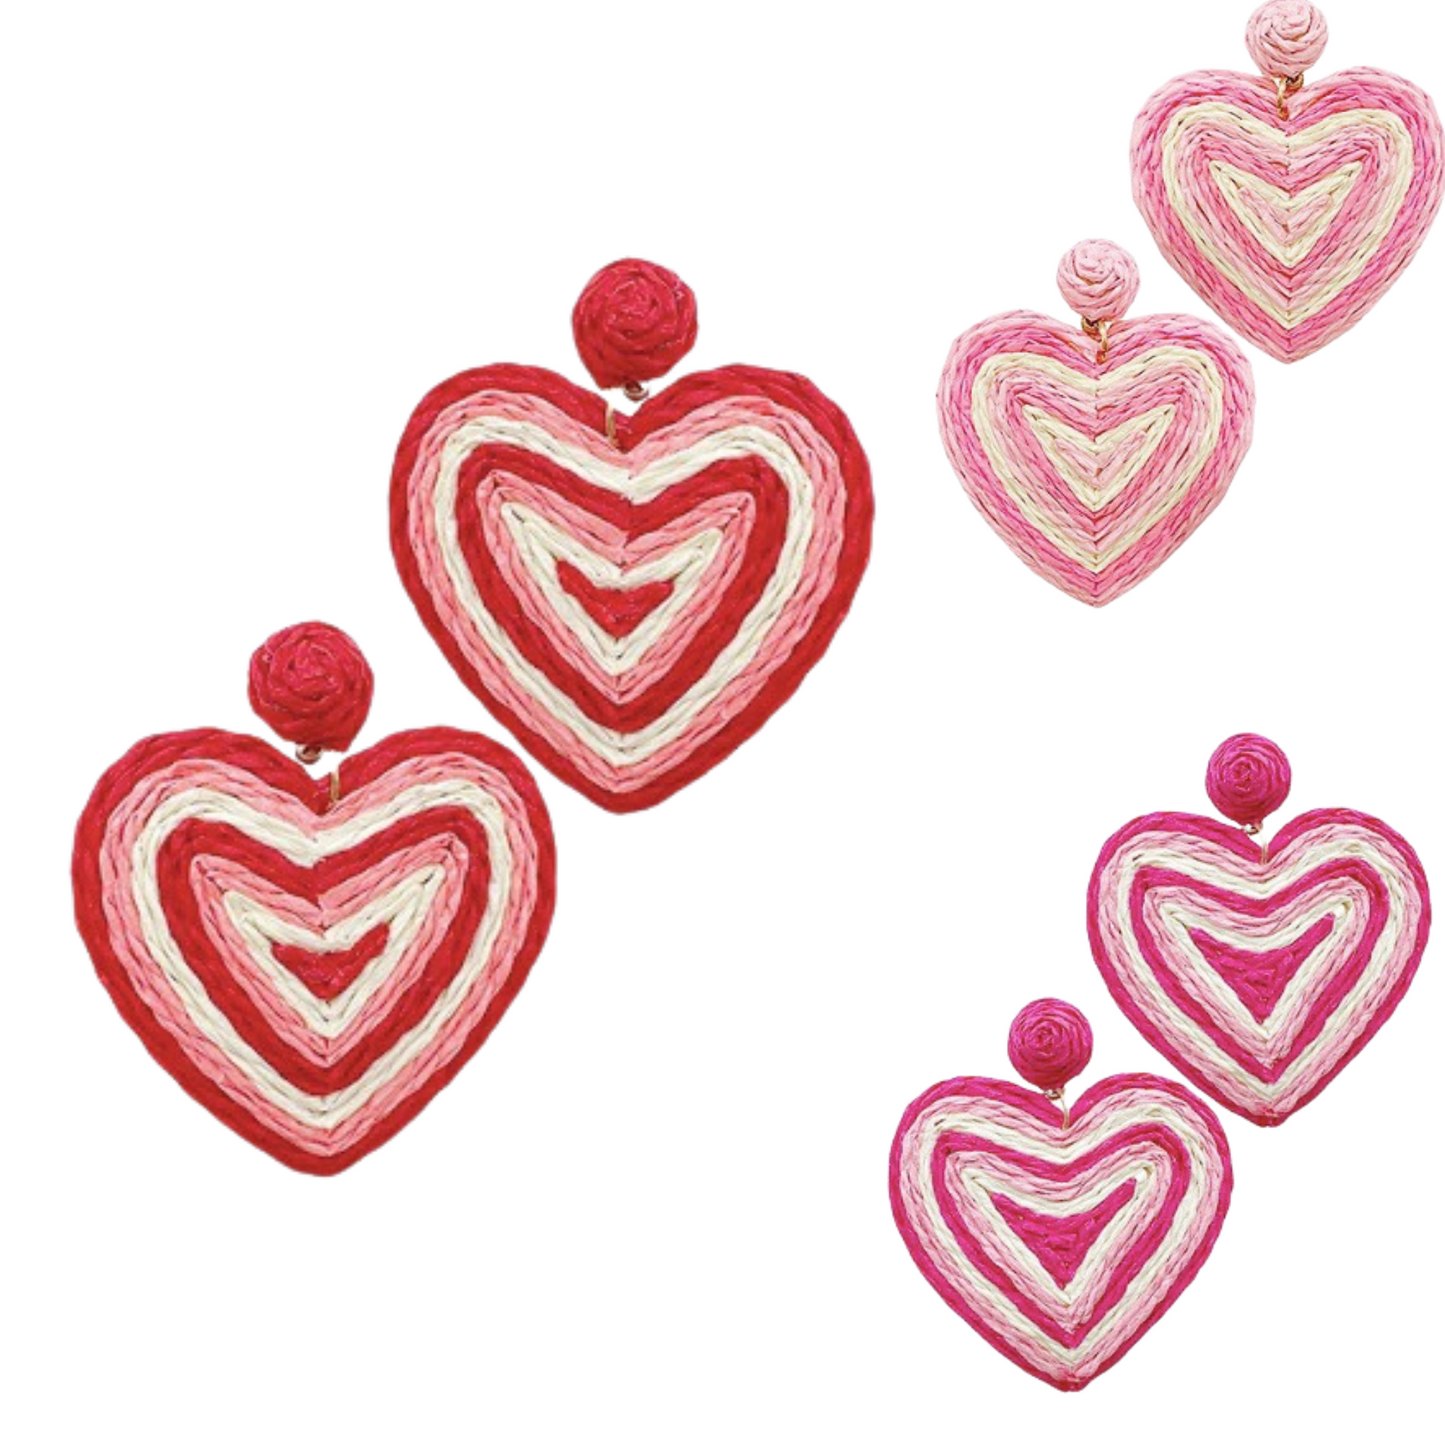 Add a touch of romance with our raffia wrapped heart earrings, perfect for Valentine's Day. Available in vibrant fuchsia, pretty pink, or passionate red. Hand-crafted in a heart shape, these earrings are a unique and stylish way to show your love.